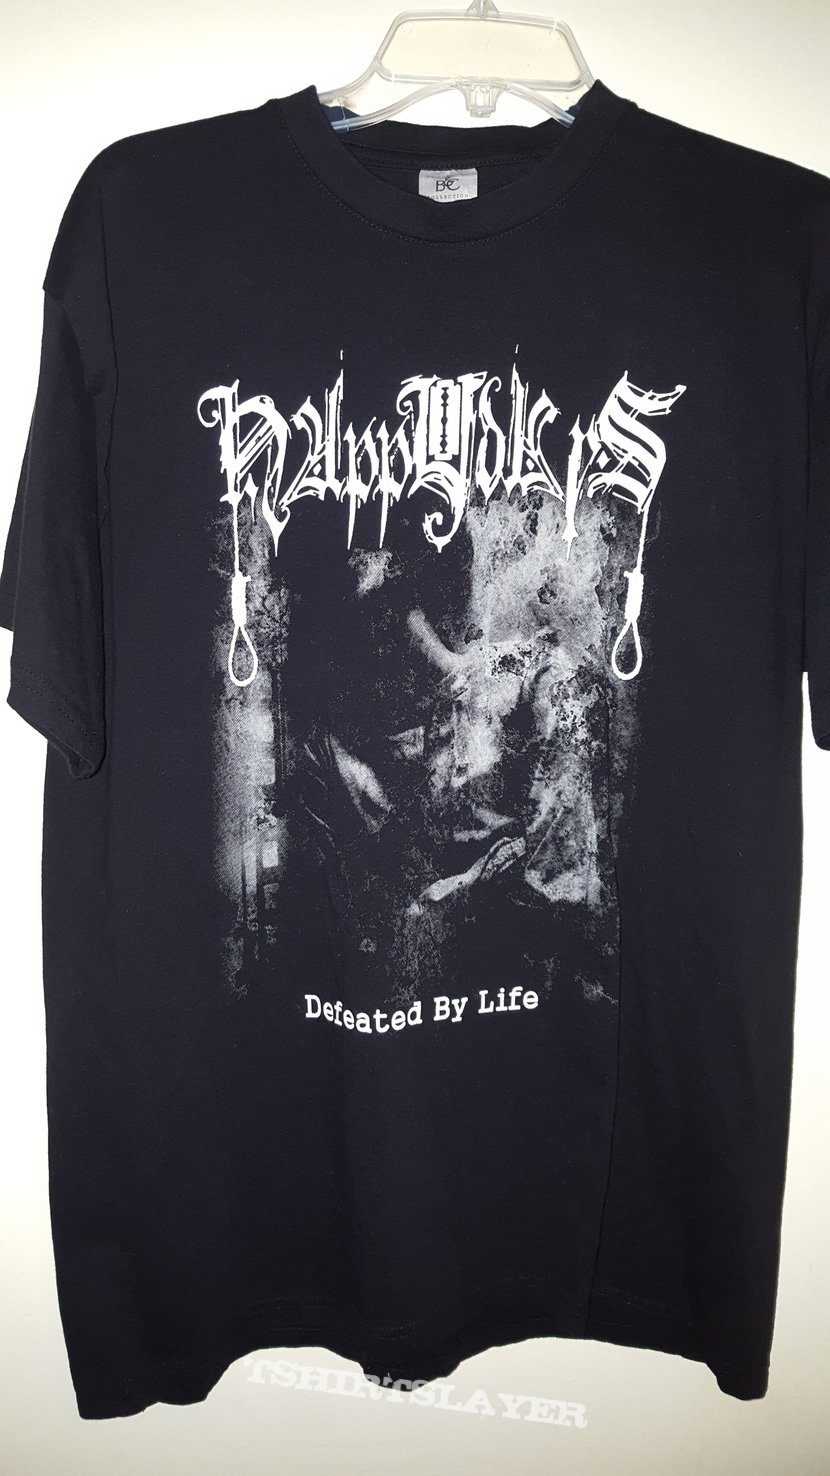 Happy Days - Defeated By Life shirt (DSBM)